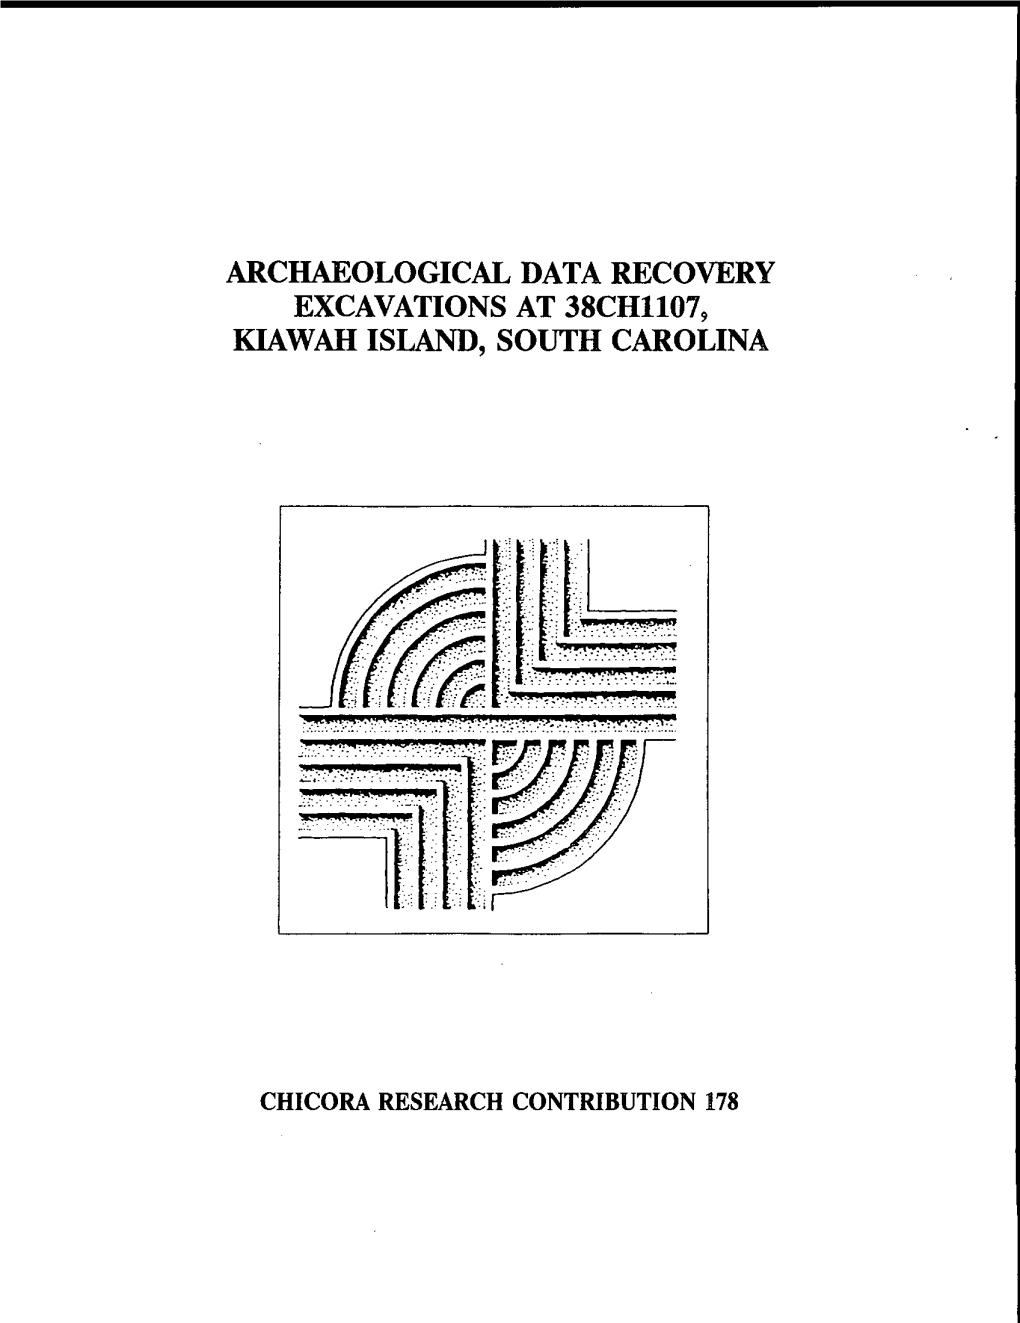 Archaeological Data Recovery Excavations at 38Ch1107, Kiawah Island, South Carolina